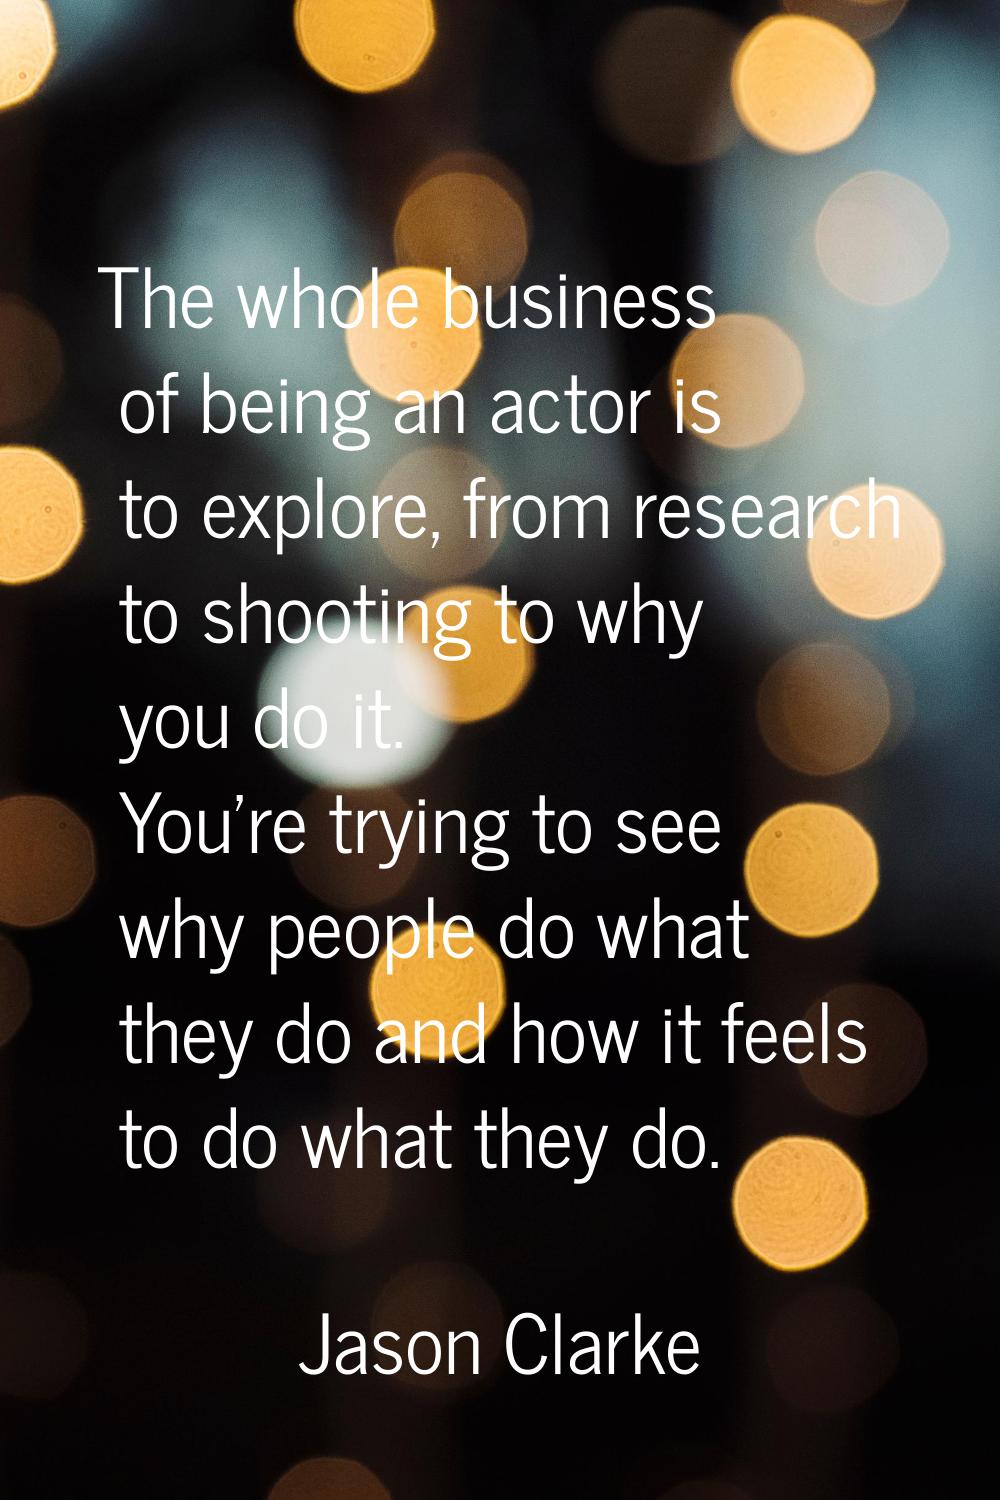 The whole business of being an actor is to explore, from research to shooting to why you do it. You